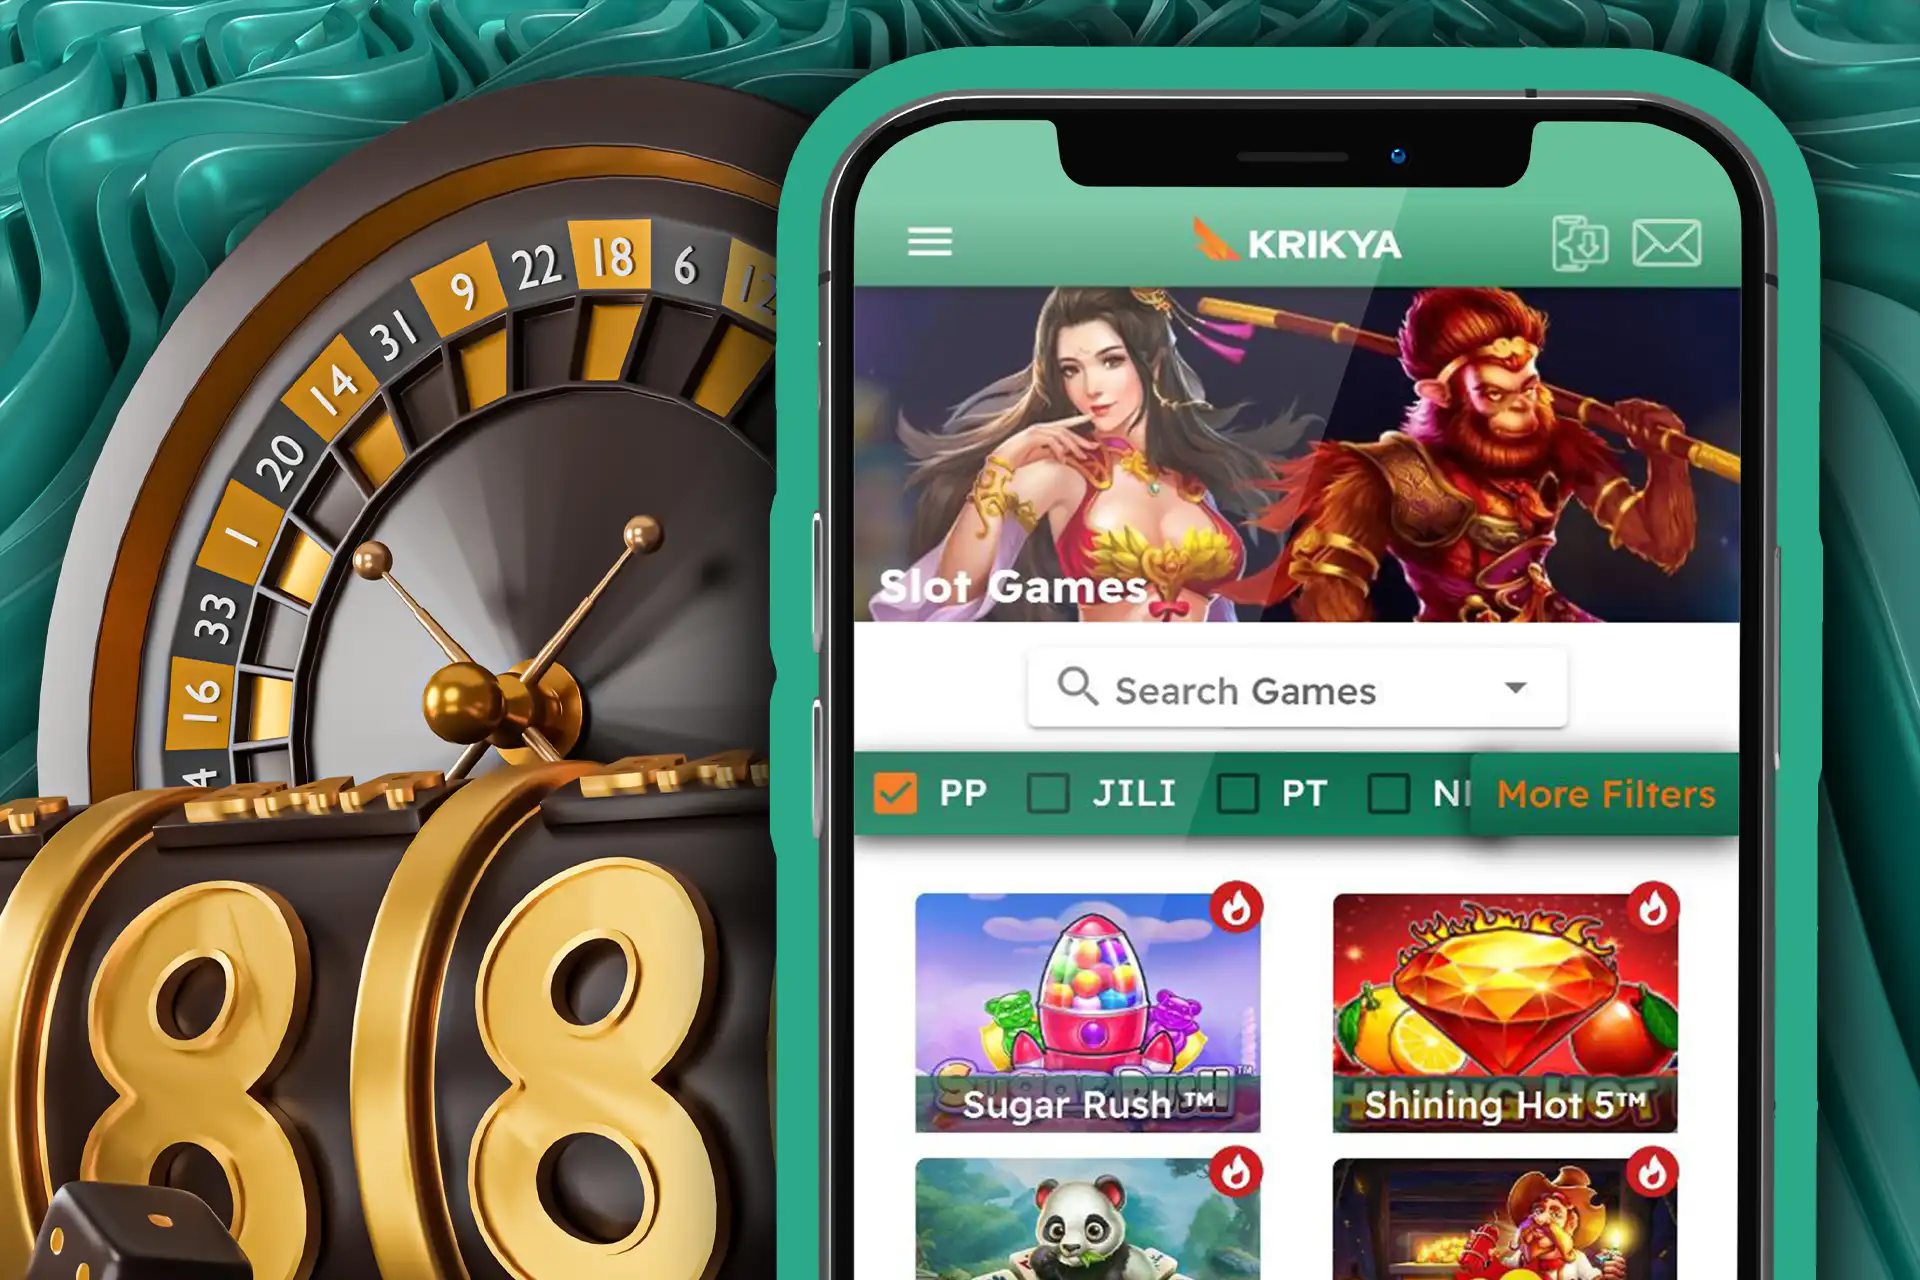 The krilya mobile app offers all the betting and casino options.